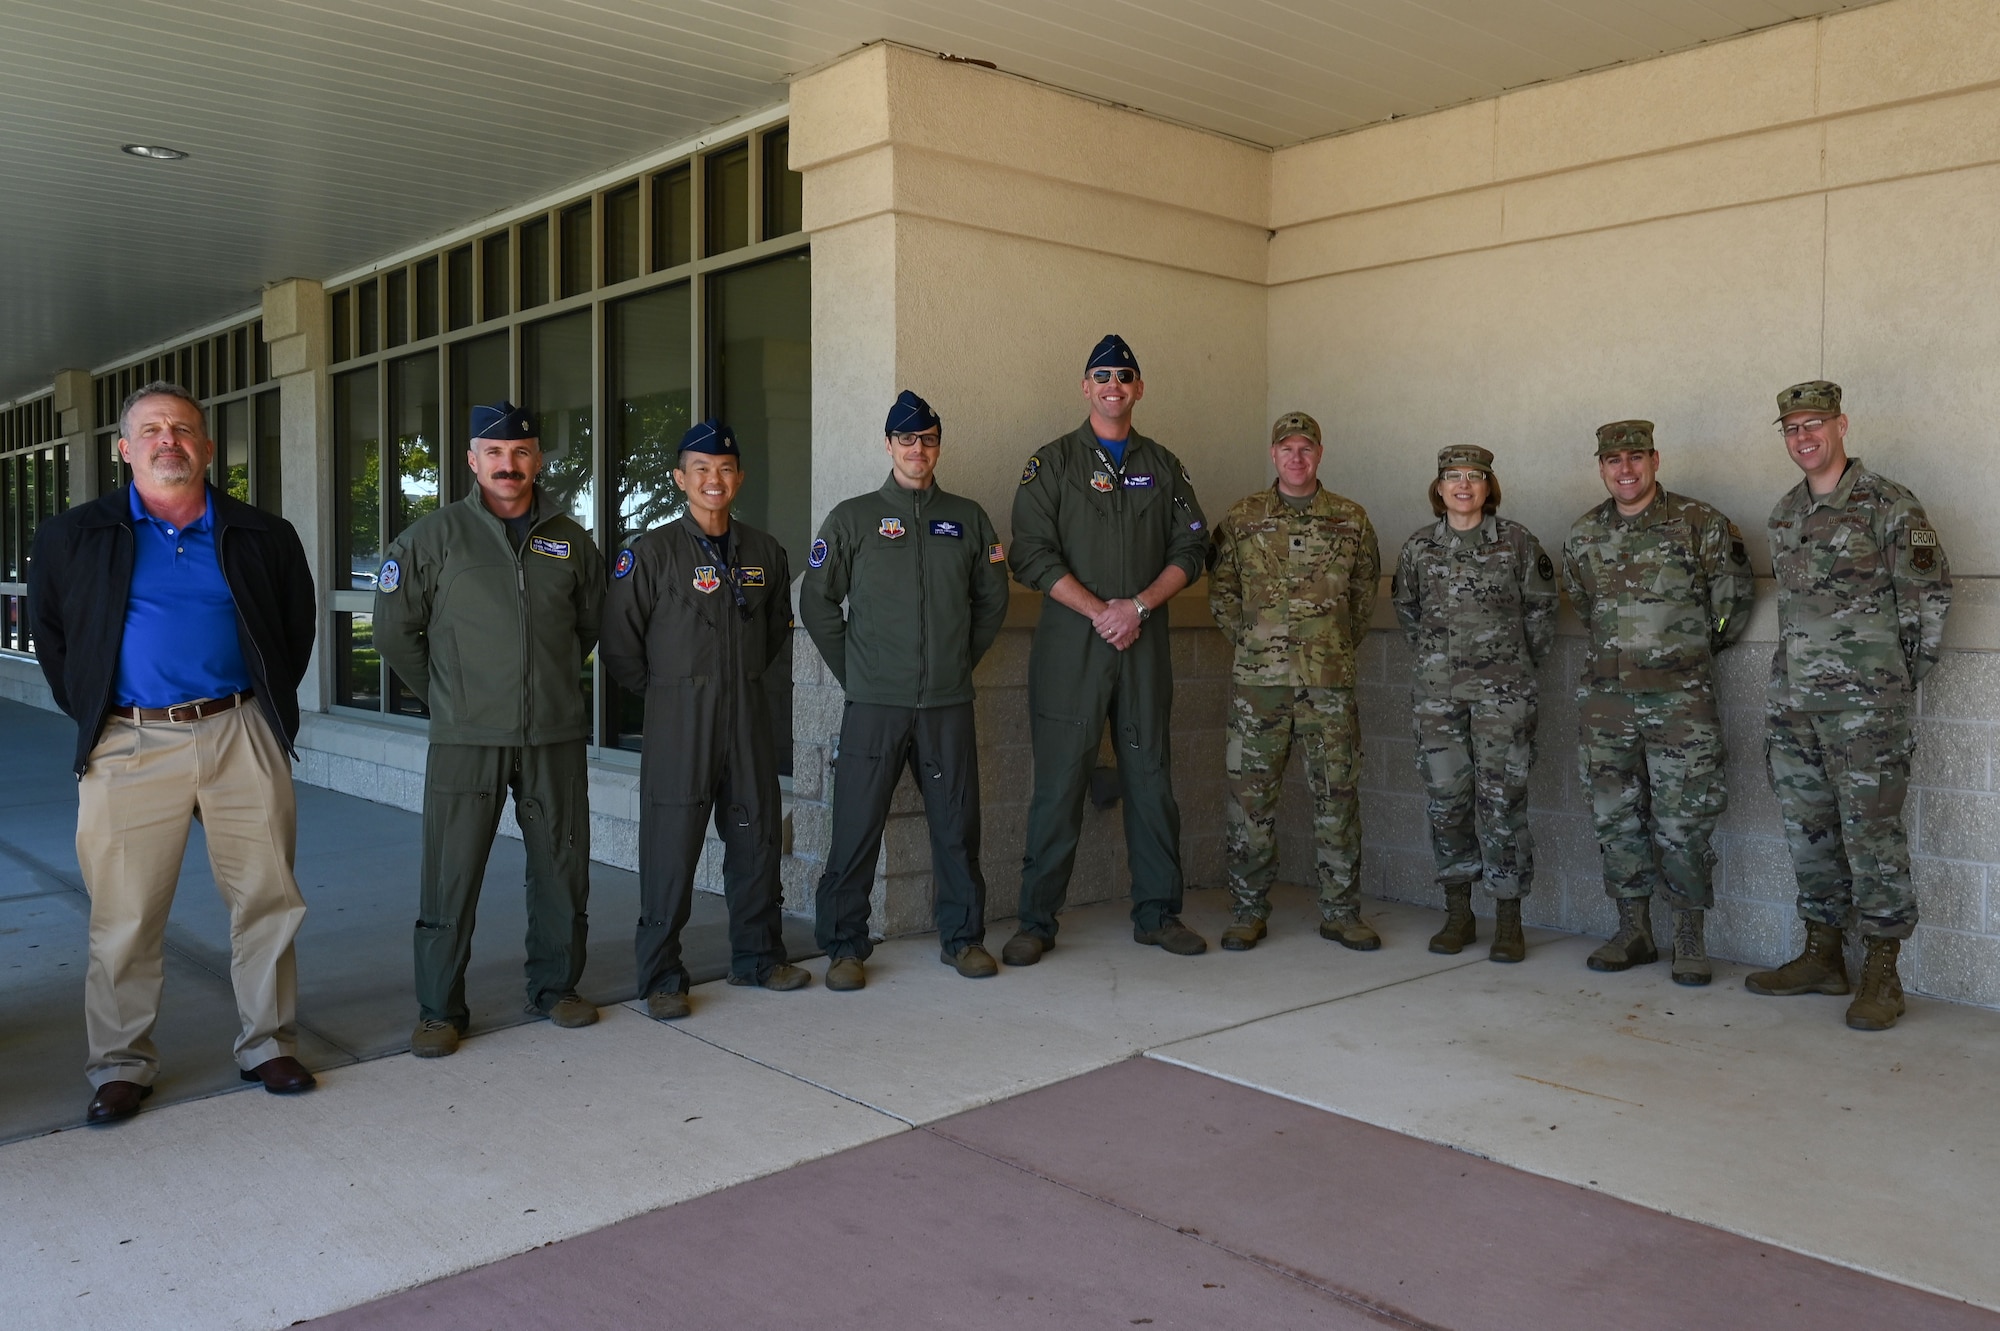 Leaders from the 350th Spectrum Warfare Wing (SWW) and U.S. Air Force Lt. Gen. Mary O’Brien, Deputy Chief of Staff for Intelligence, Surveillance, Reconnaissance and Cyber Effects Operations, pose for photo during her visit at Eglin Air Force Base, Fla., Nov. 18, 2022. The 350th SWW delivers adaptive and cutting-edge Electromagnetic Spectrum capabilities that provide the warfighter a tactical and strategic competitive advantage and freedom to attack, maneuver, and defend. (U.S. Air Force photo by Staff Sgt. Ericka A. Woolever)